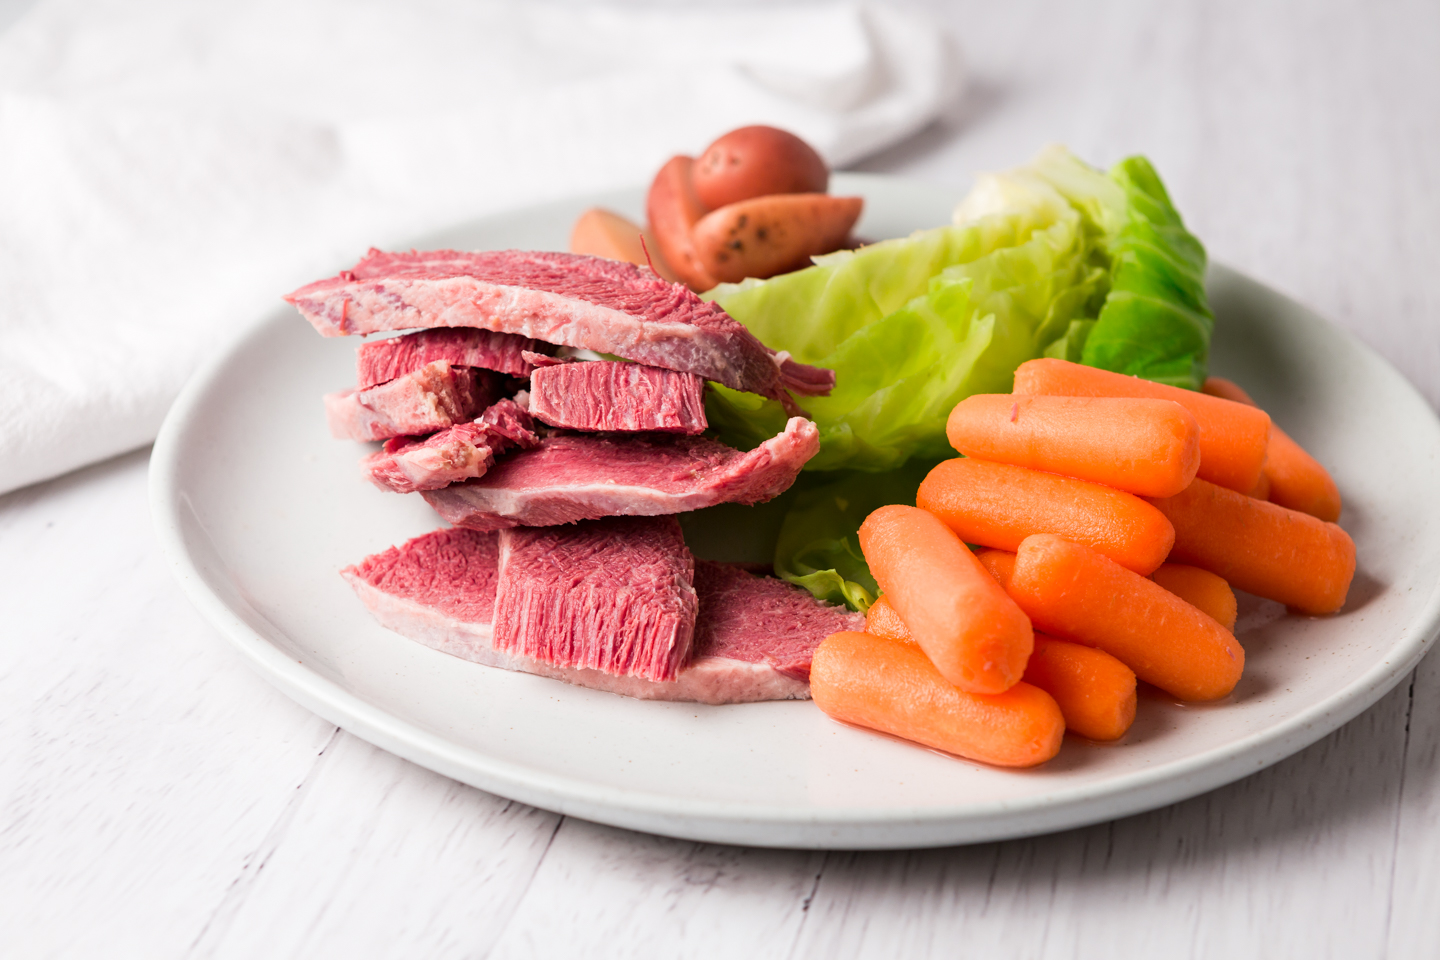 Corned beef with carrots, cabbage and potatoes